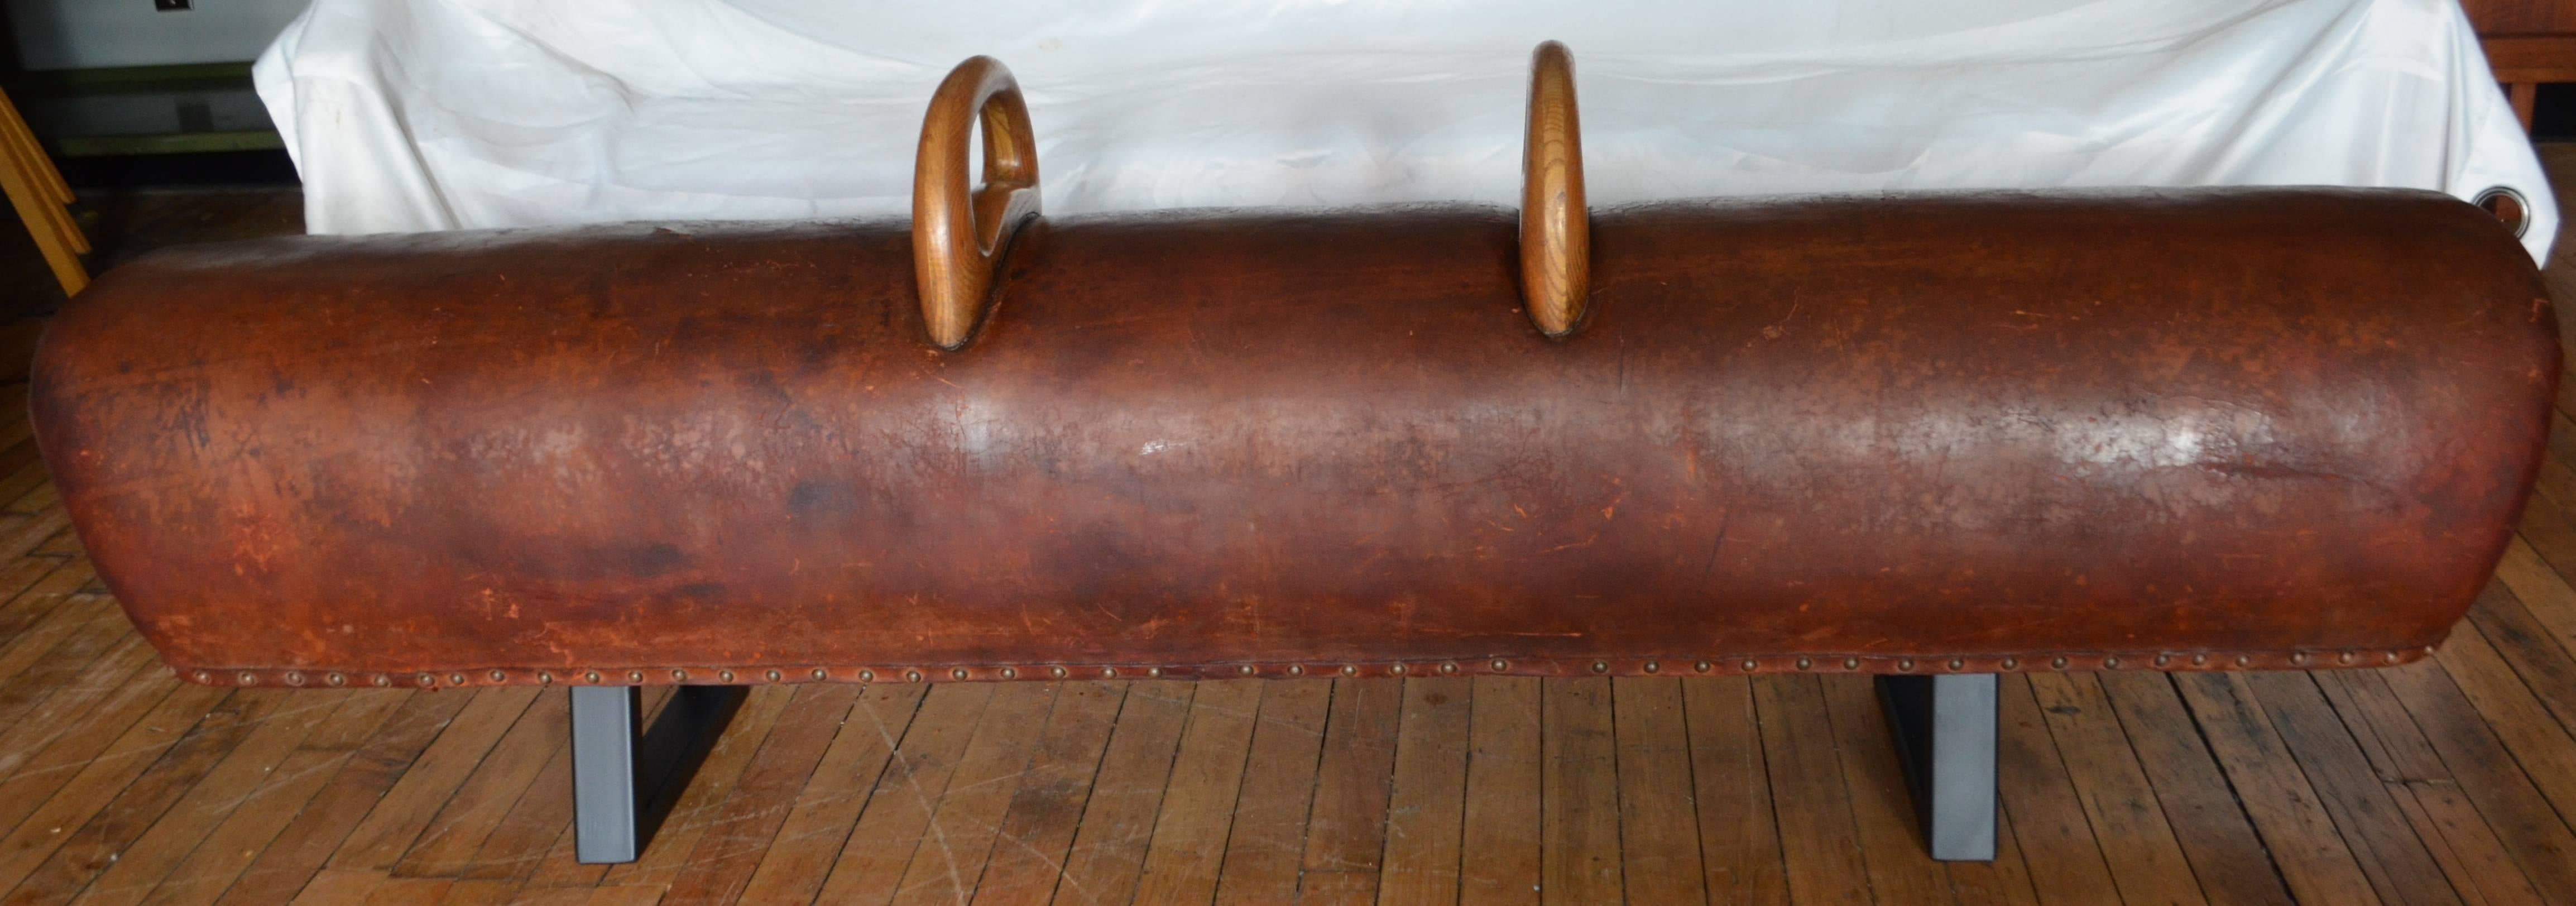 Gymnast leather pommel horse has been transformed into a bench with steel bracket legs painted black. Striking bench for hallway or entranceway or overflow seating. Beautifully-worn leather has been cleaned and conditioned displaying dramatic color